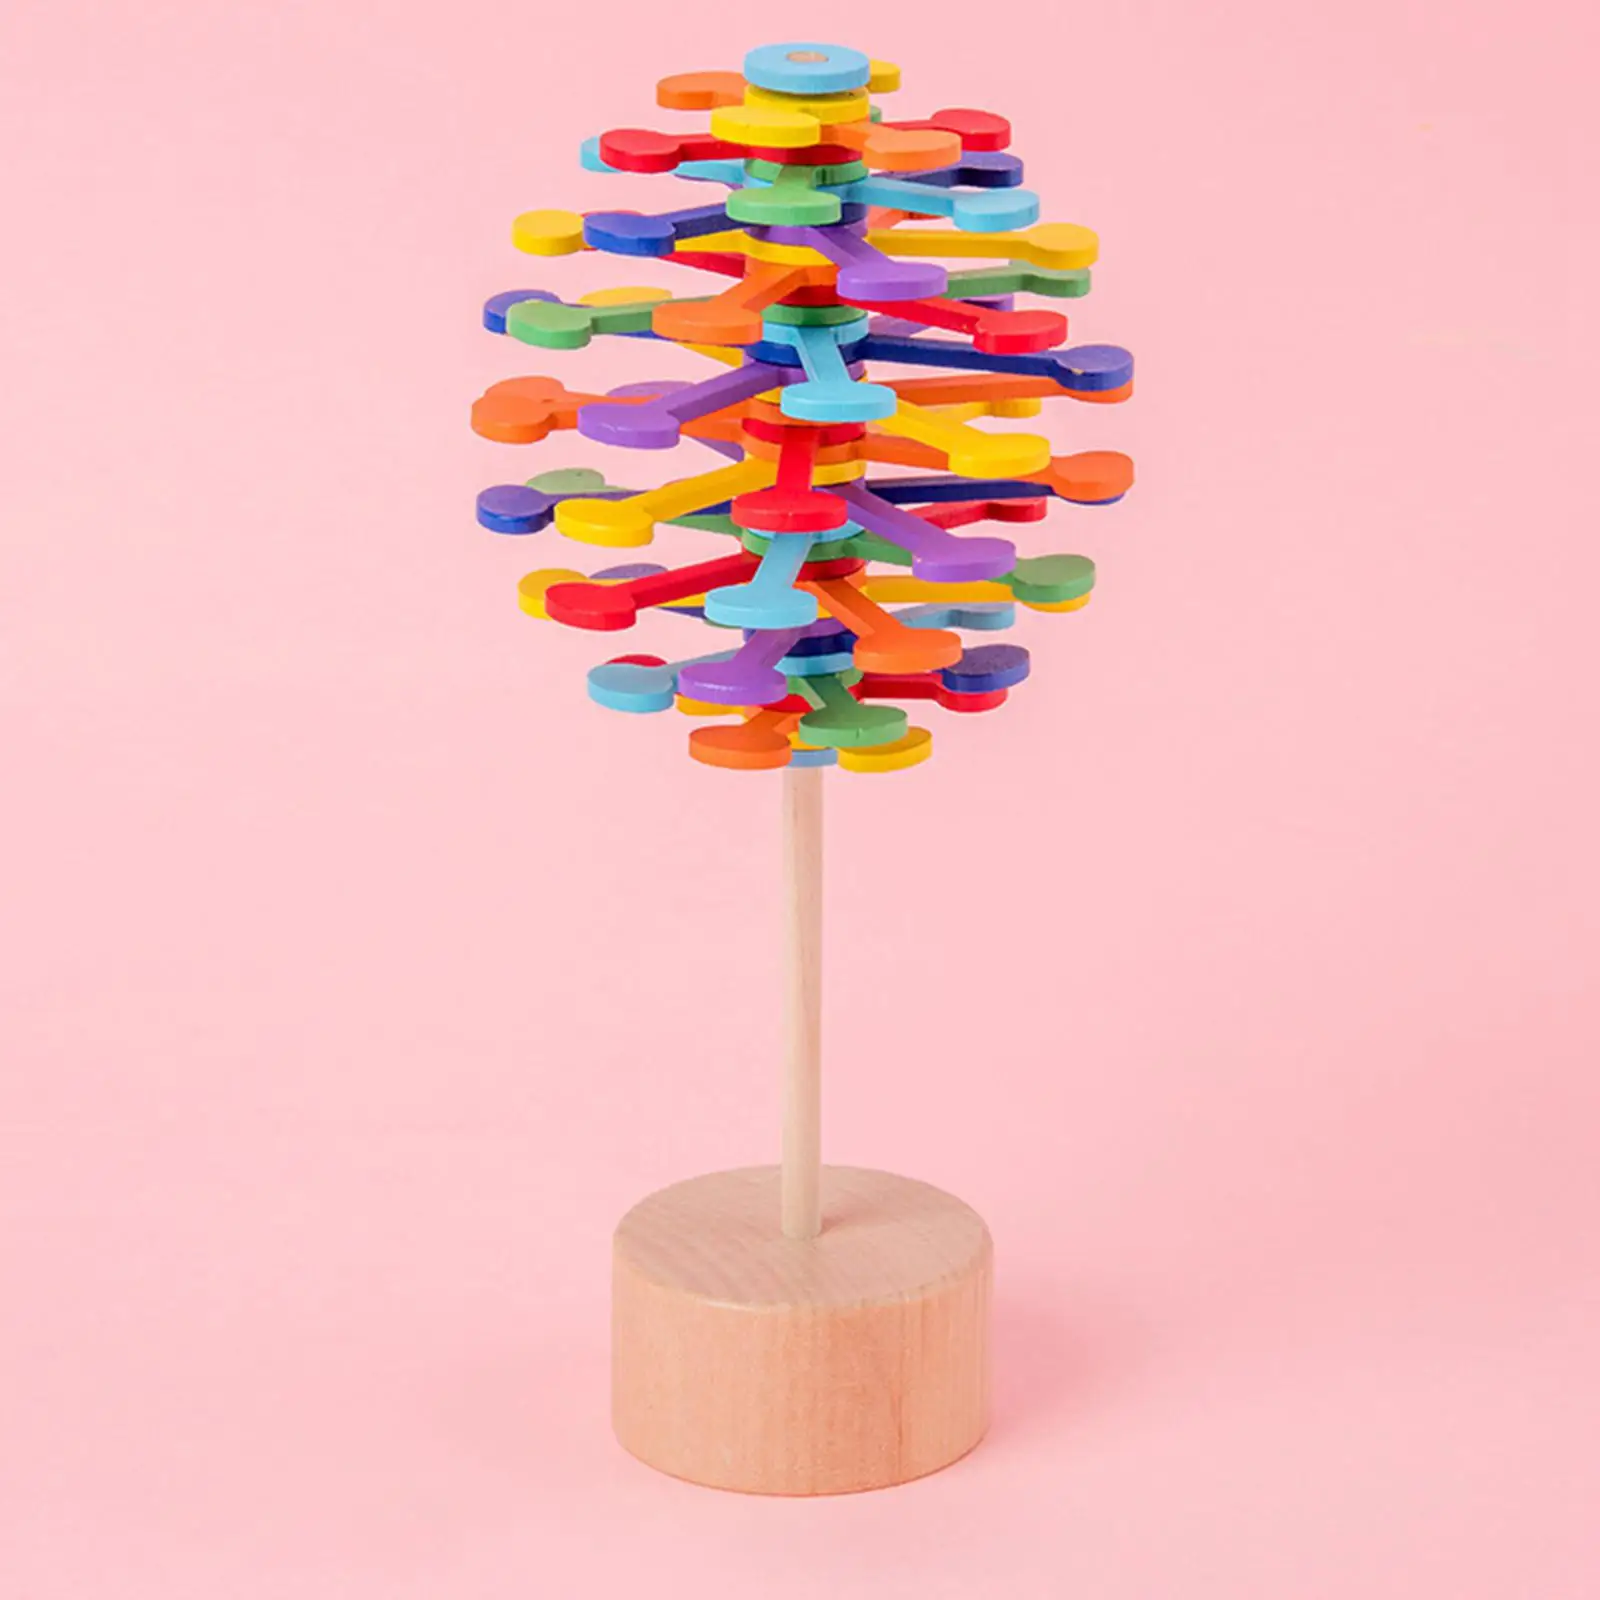 Creative Wooden Rotary Spiral Lollipop Sensory Toys Desktop Ornaments Multicolor Rotating Spiral Lollipop for Birthday Home